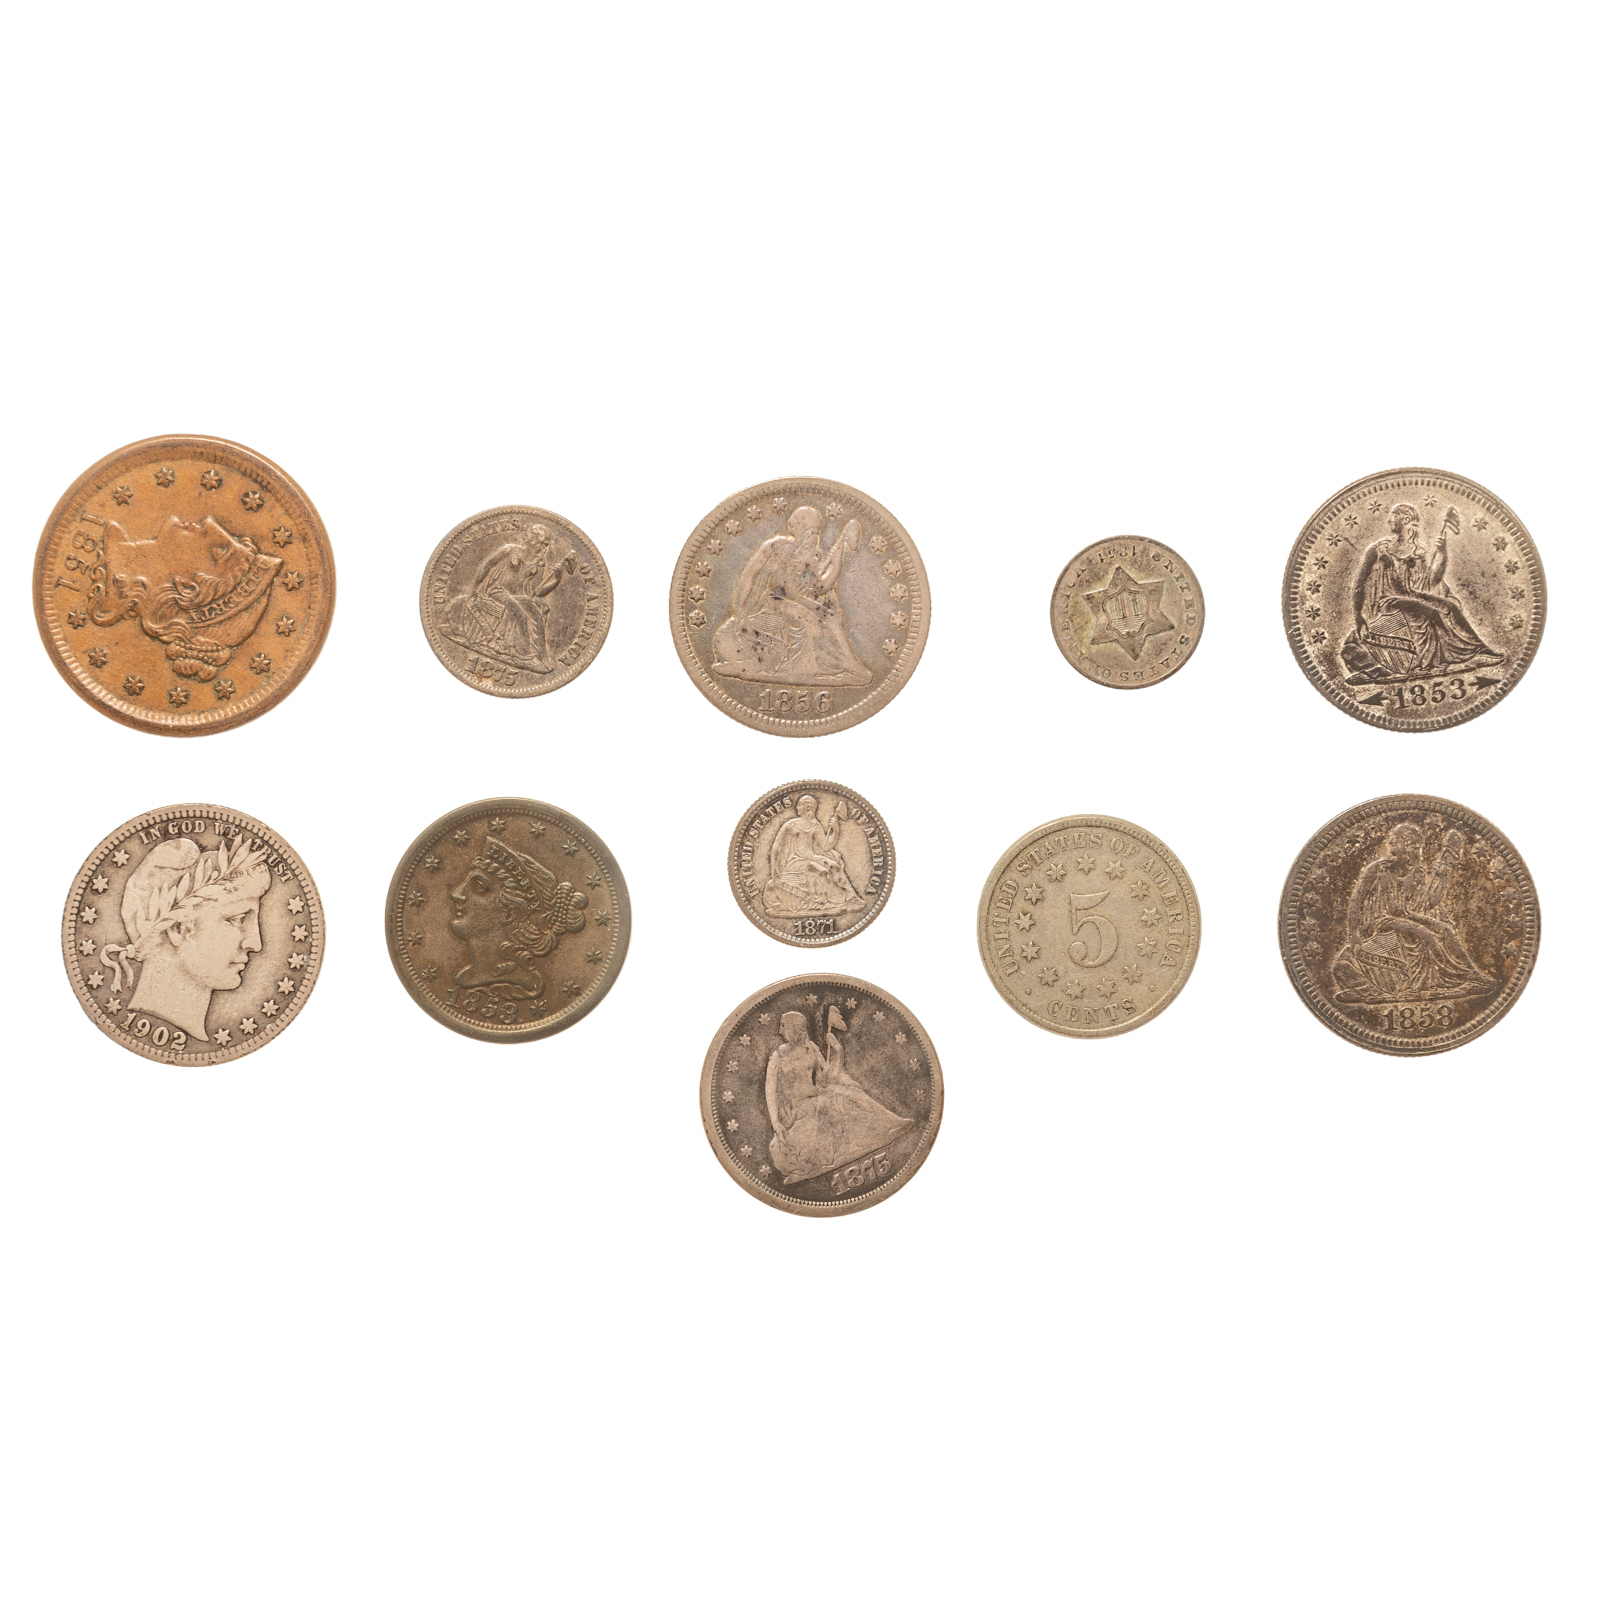 ELEVEN US TYPE COINS WITH NICE